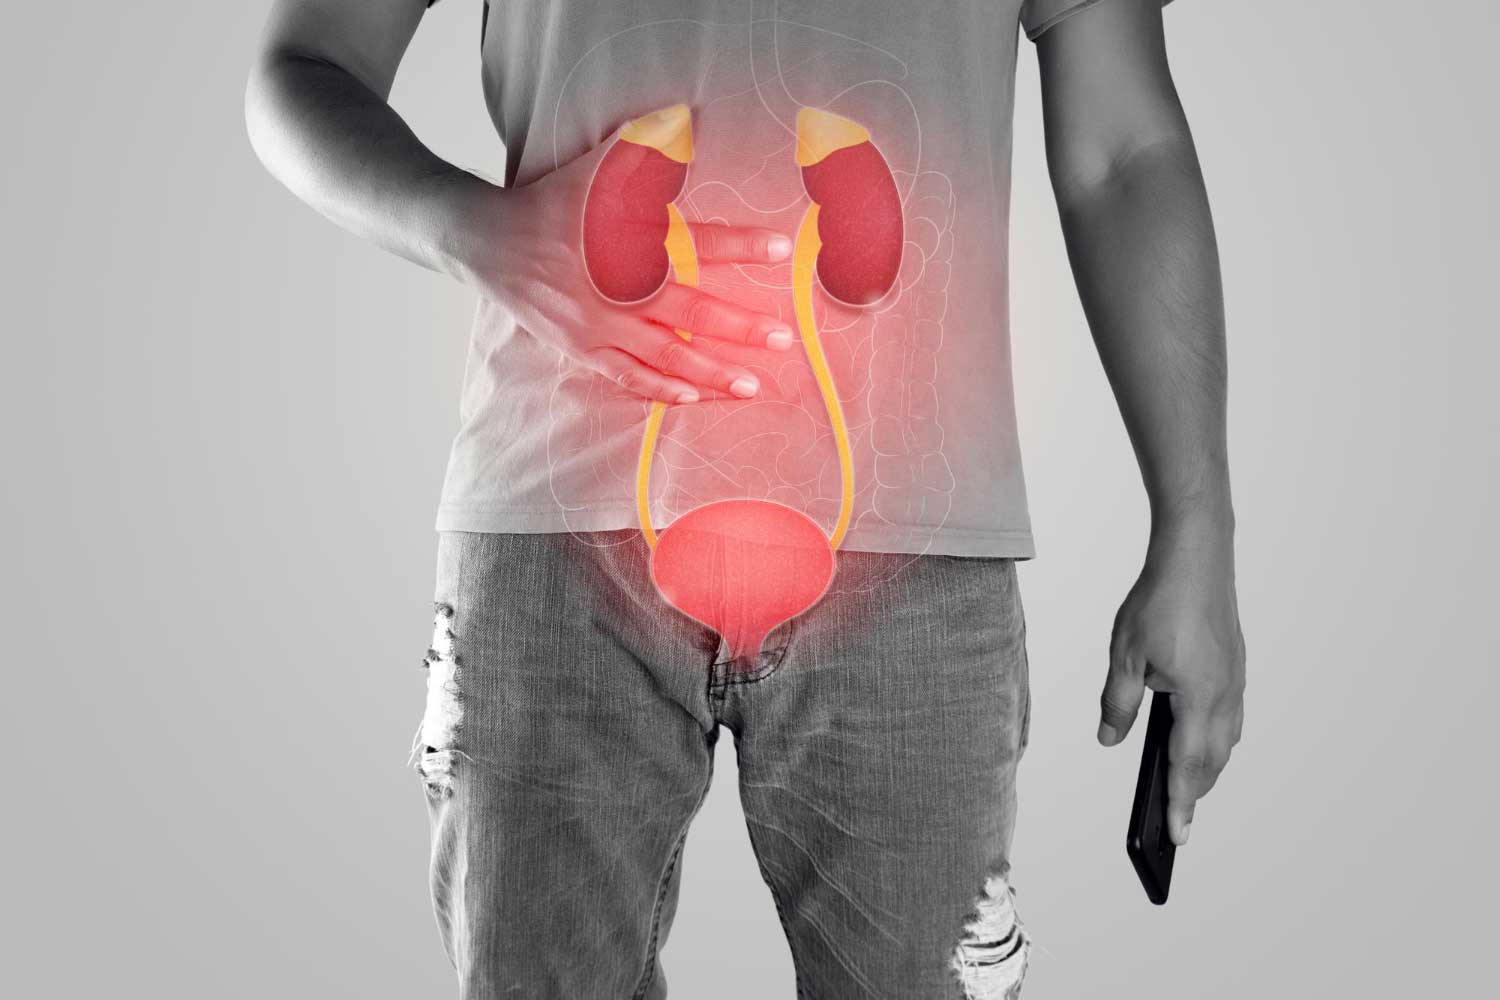 Kidney and urethra illustration on the men body against a gray background